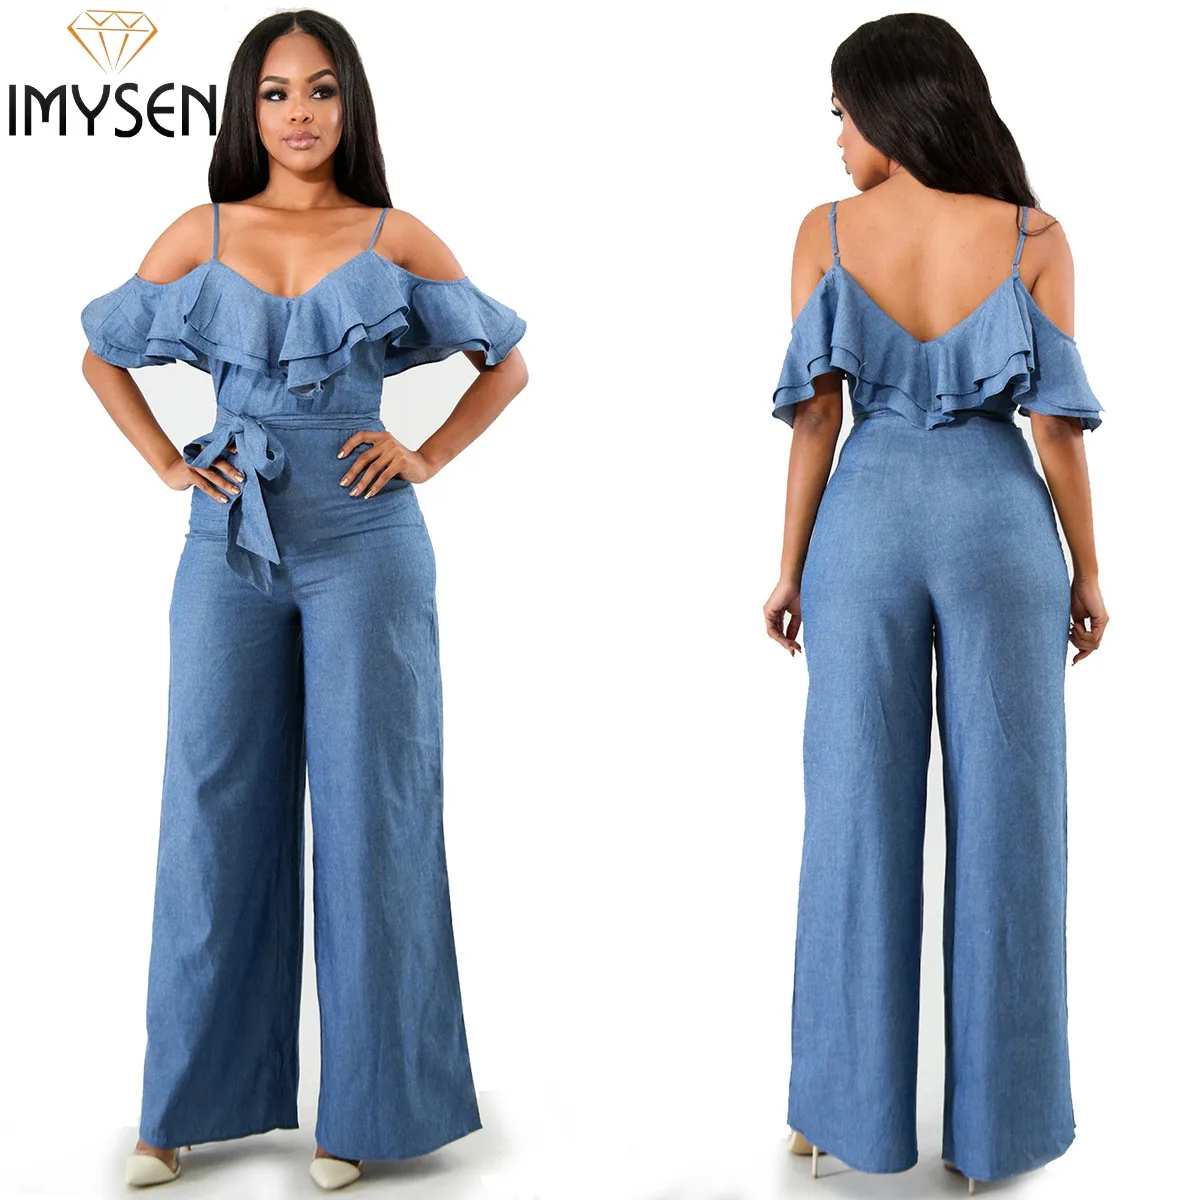 IMYSEN 2018 Summer Ruffled Jumpsuit Women Romper New Arrive Casual ...